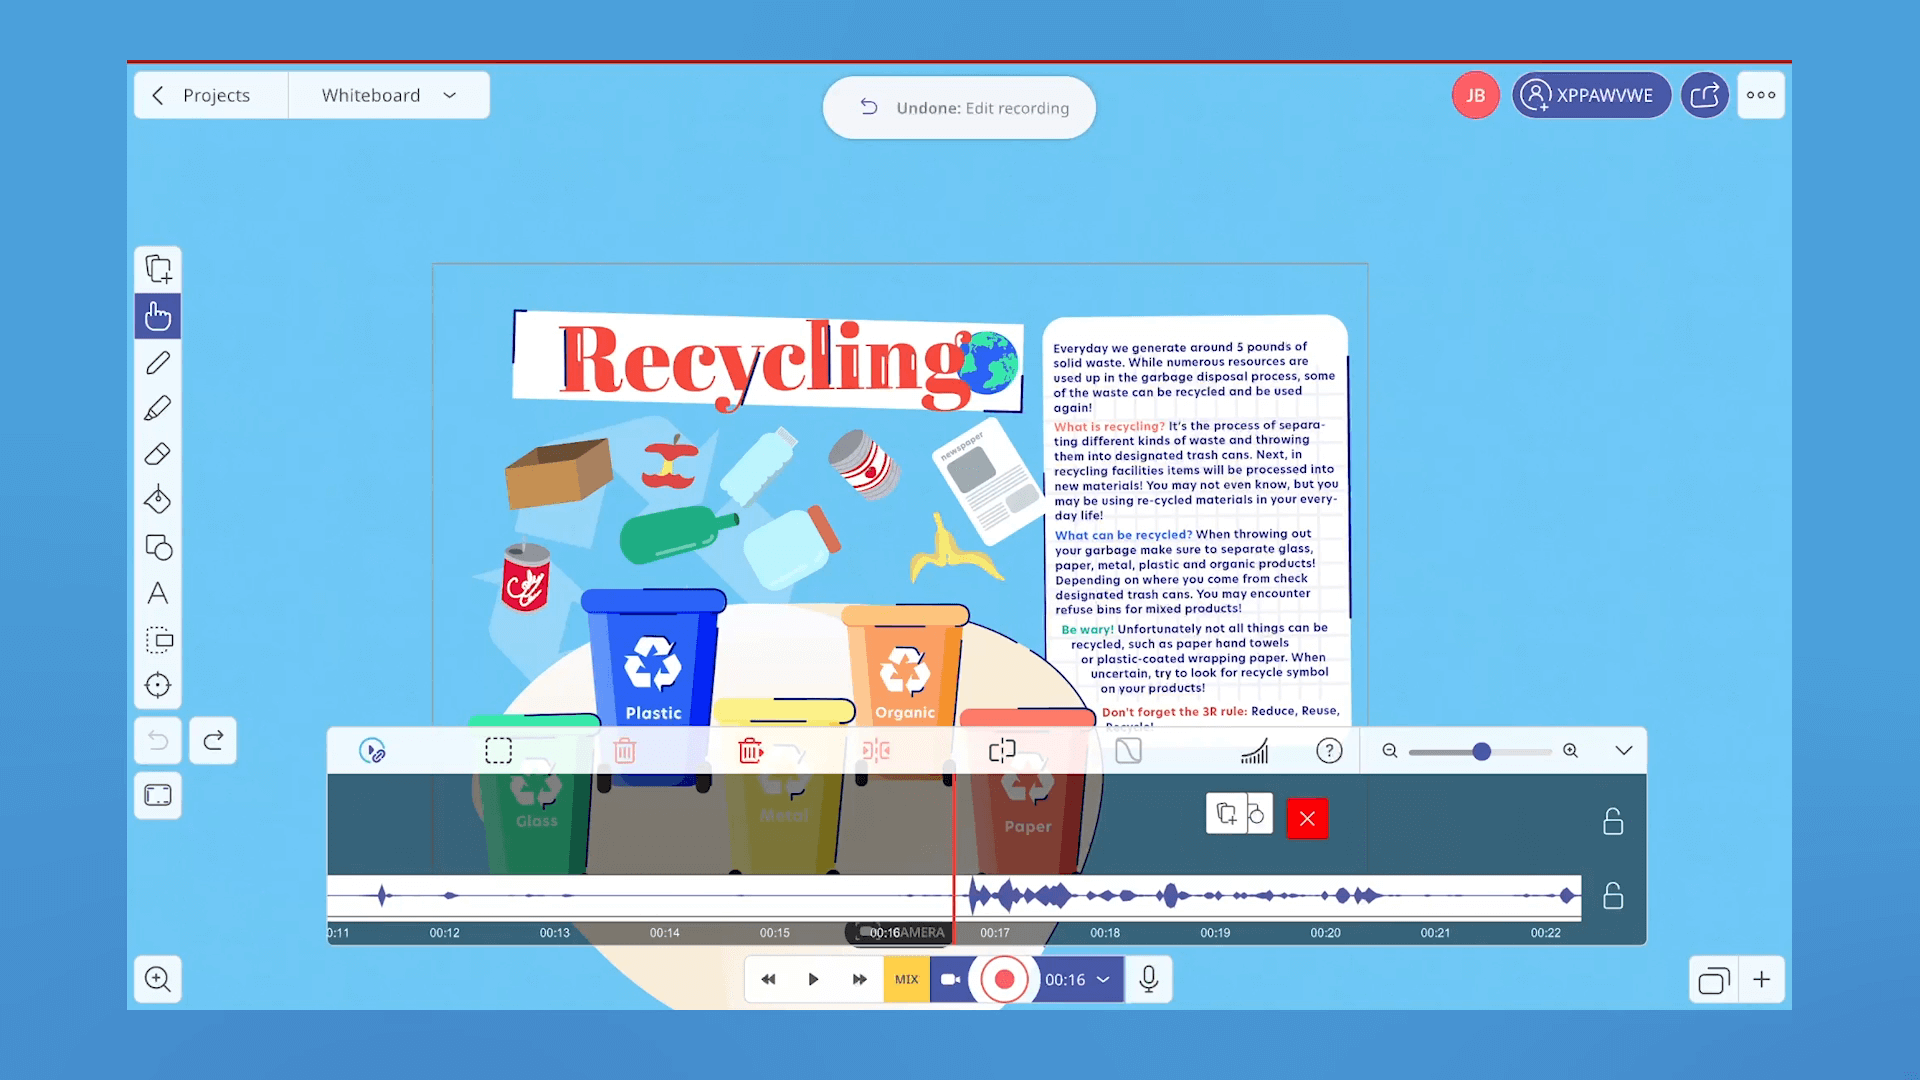 On screen, the user edits the recording of their recycling lesson.